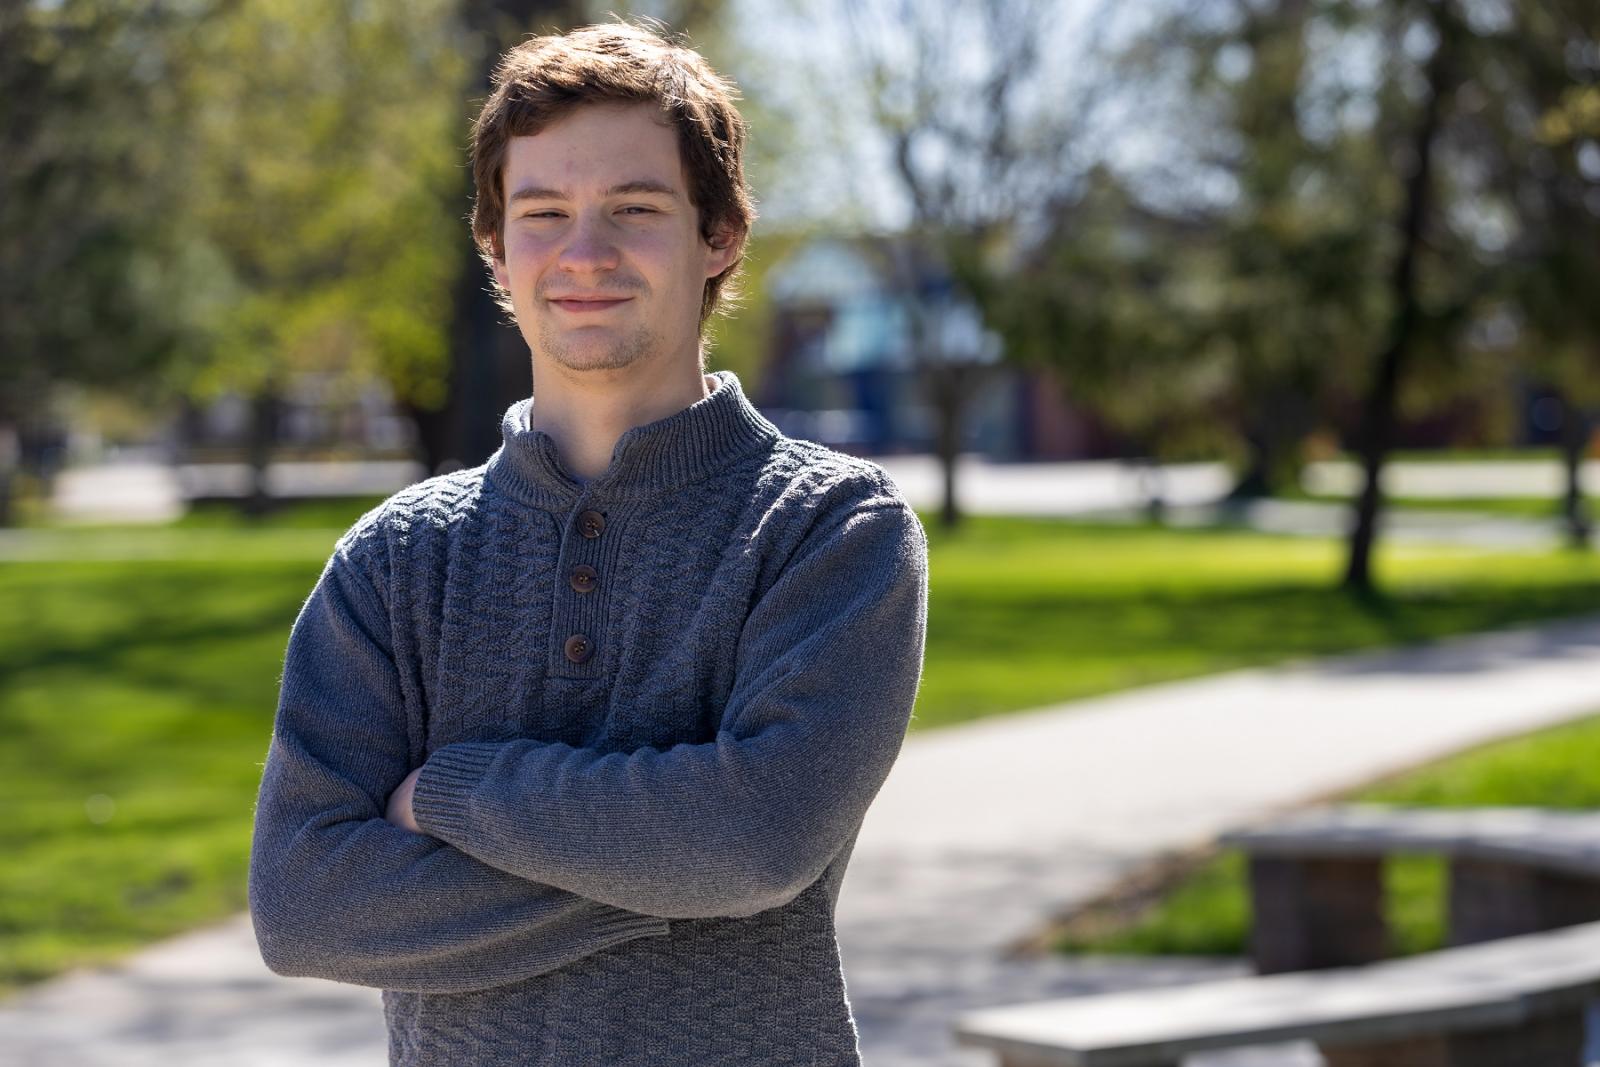 Jonathan Bass poses for a photo outside on the Lawrence campus.